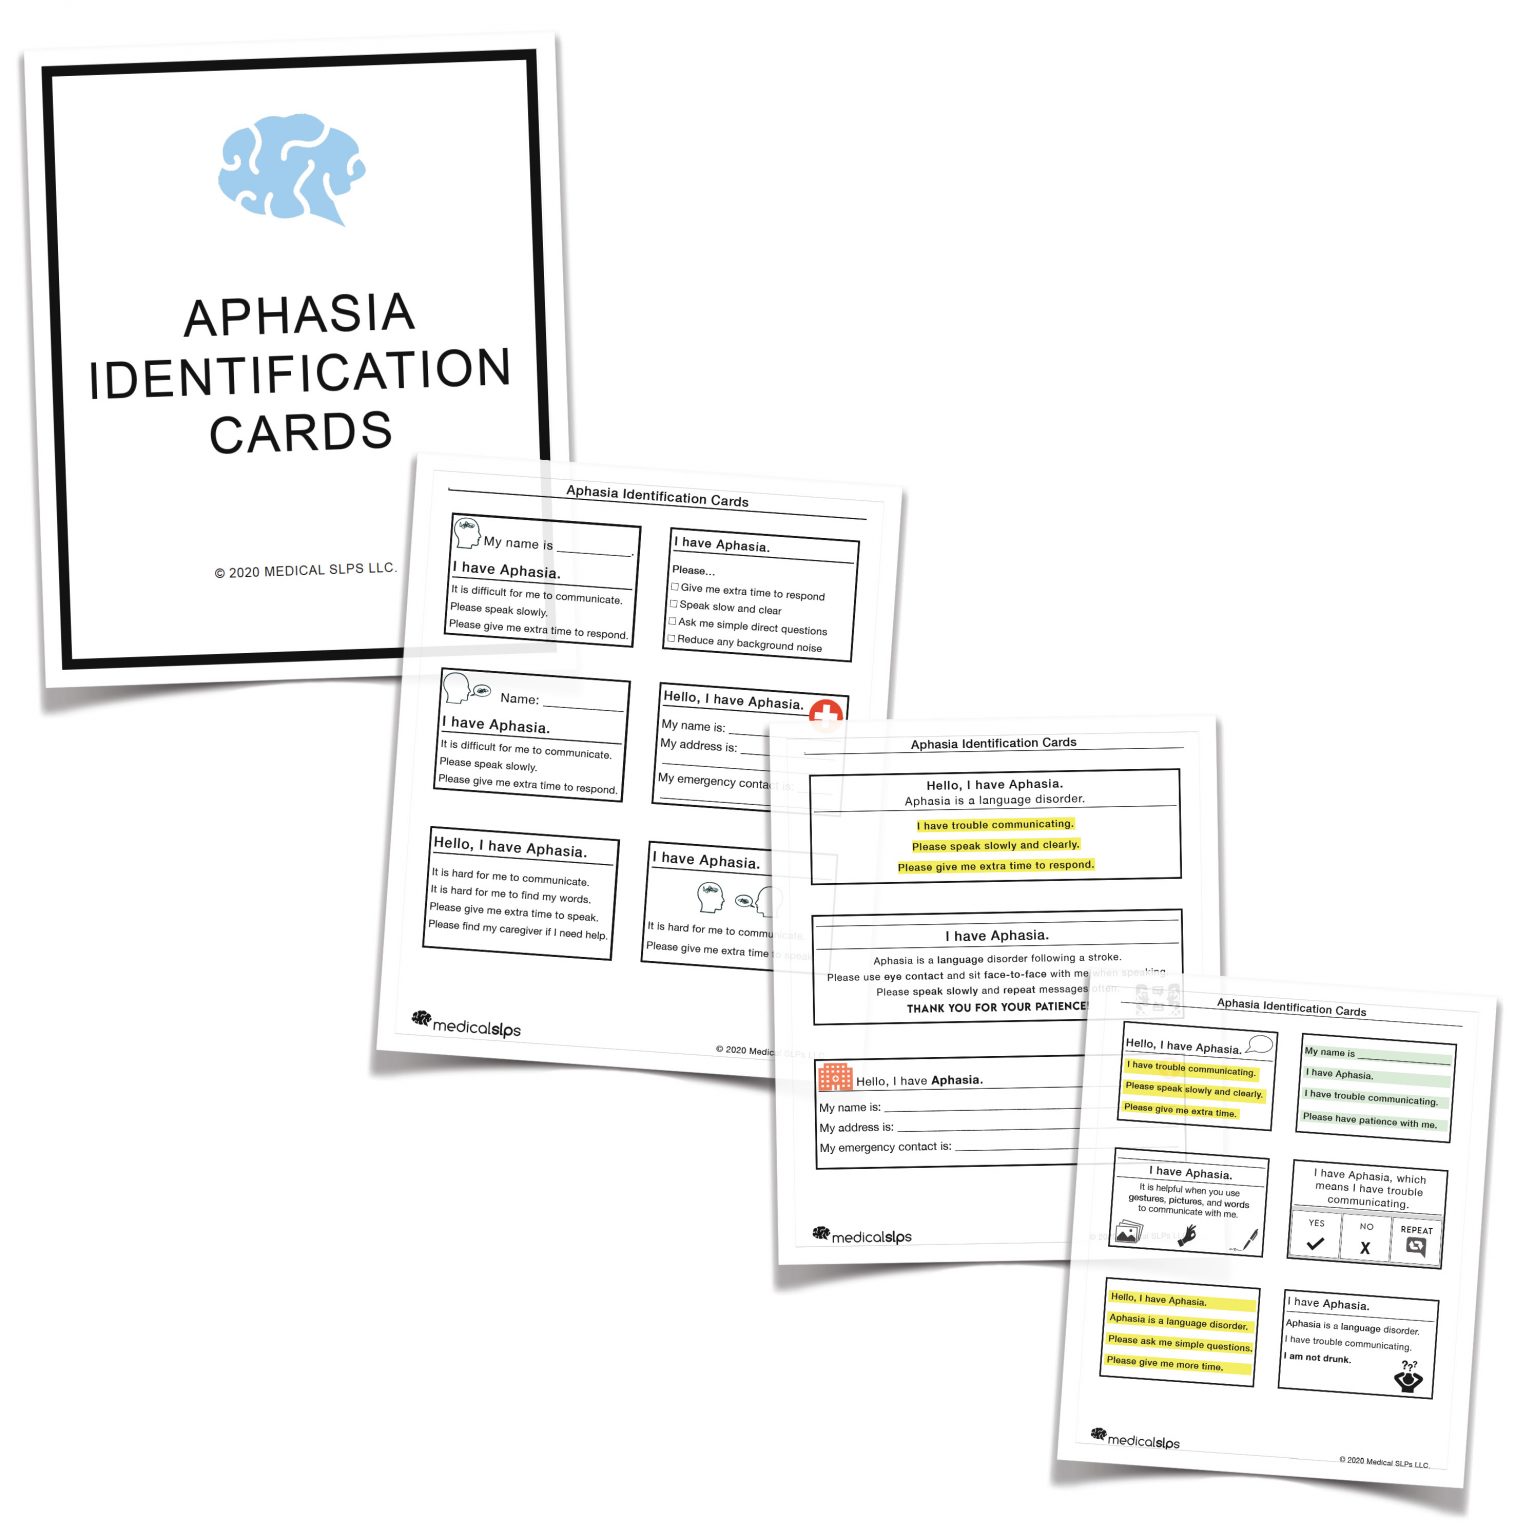 aphasia-identification-cards-medical-slps